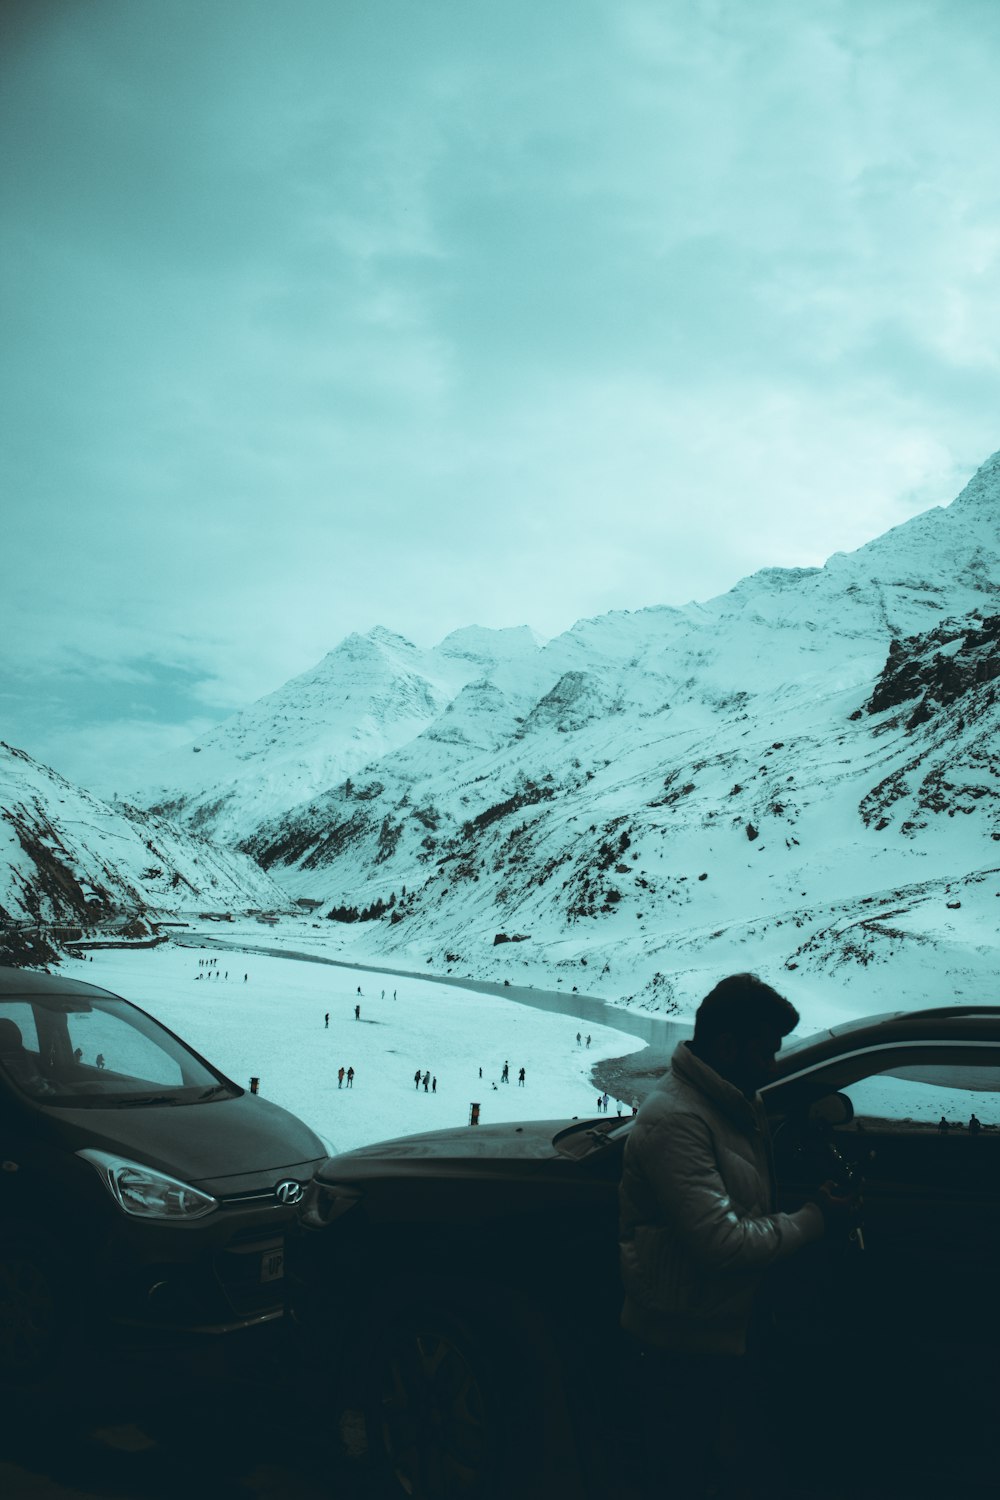 a person sitting in a car in front of a snowy mountain